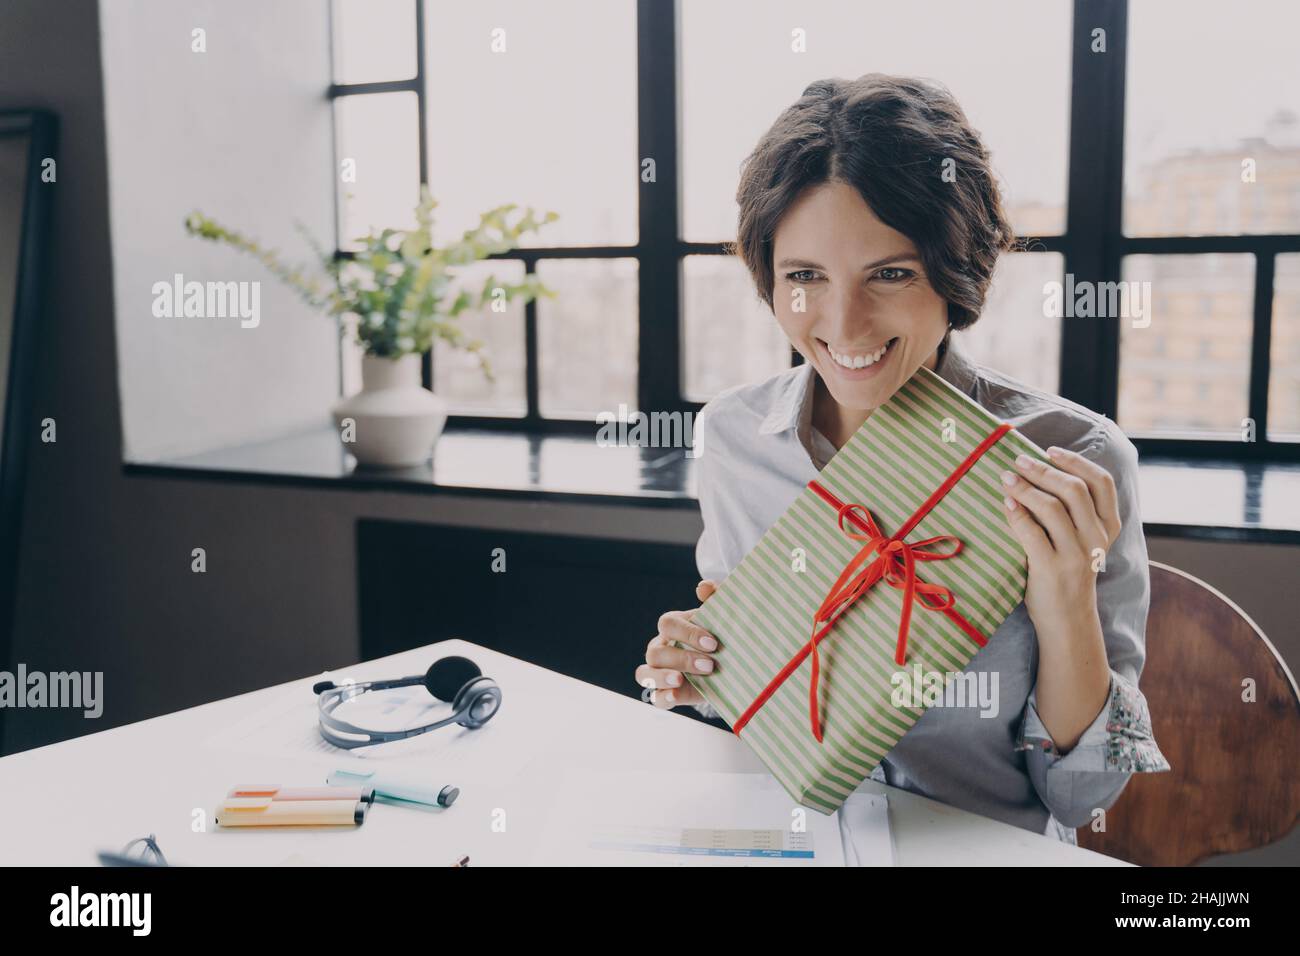 Cheerful lady office employee looking at screen broadly smiling showing to computer camera Xmas gift Stock Photo